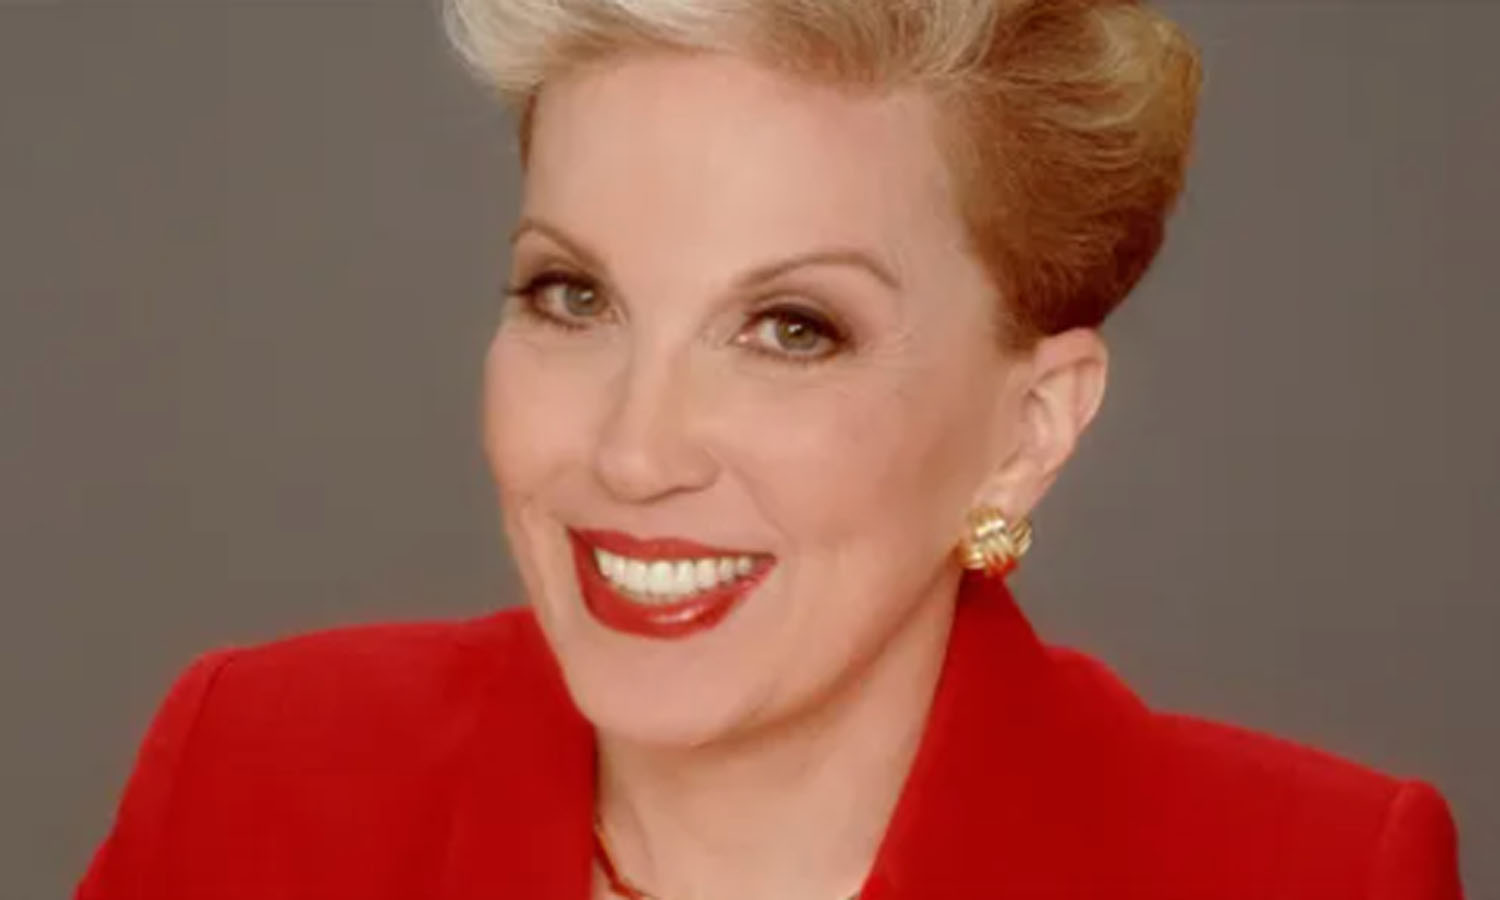 Dear Abby: Does this mean I’m not invited to the wedding?